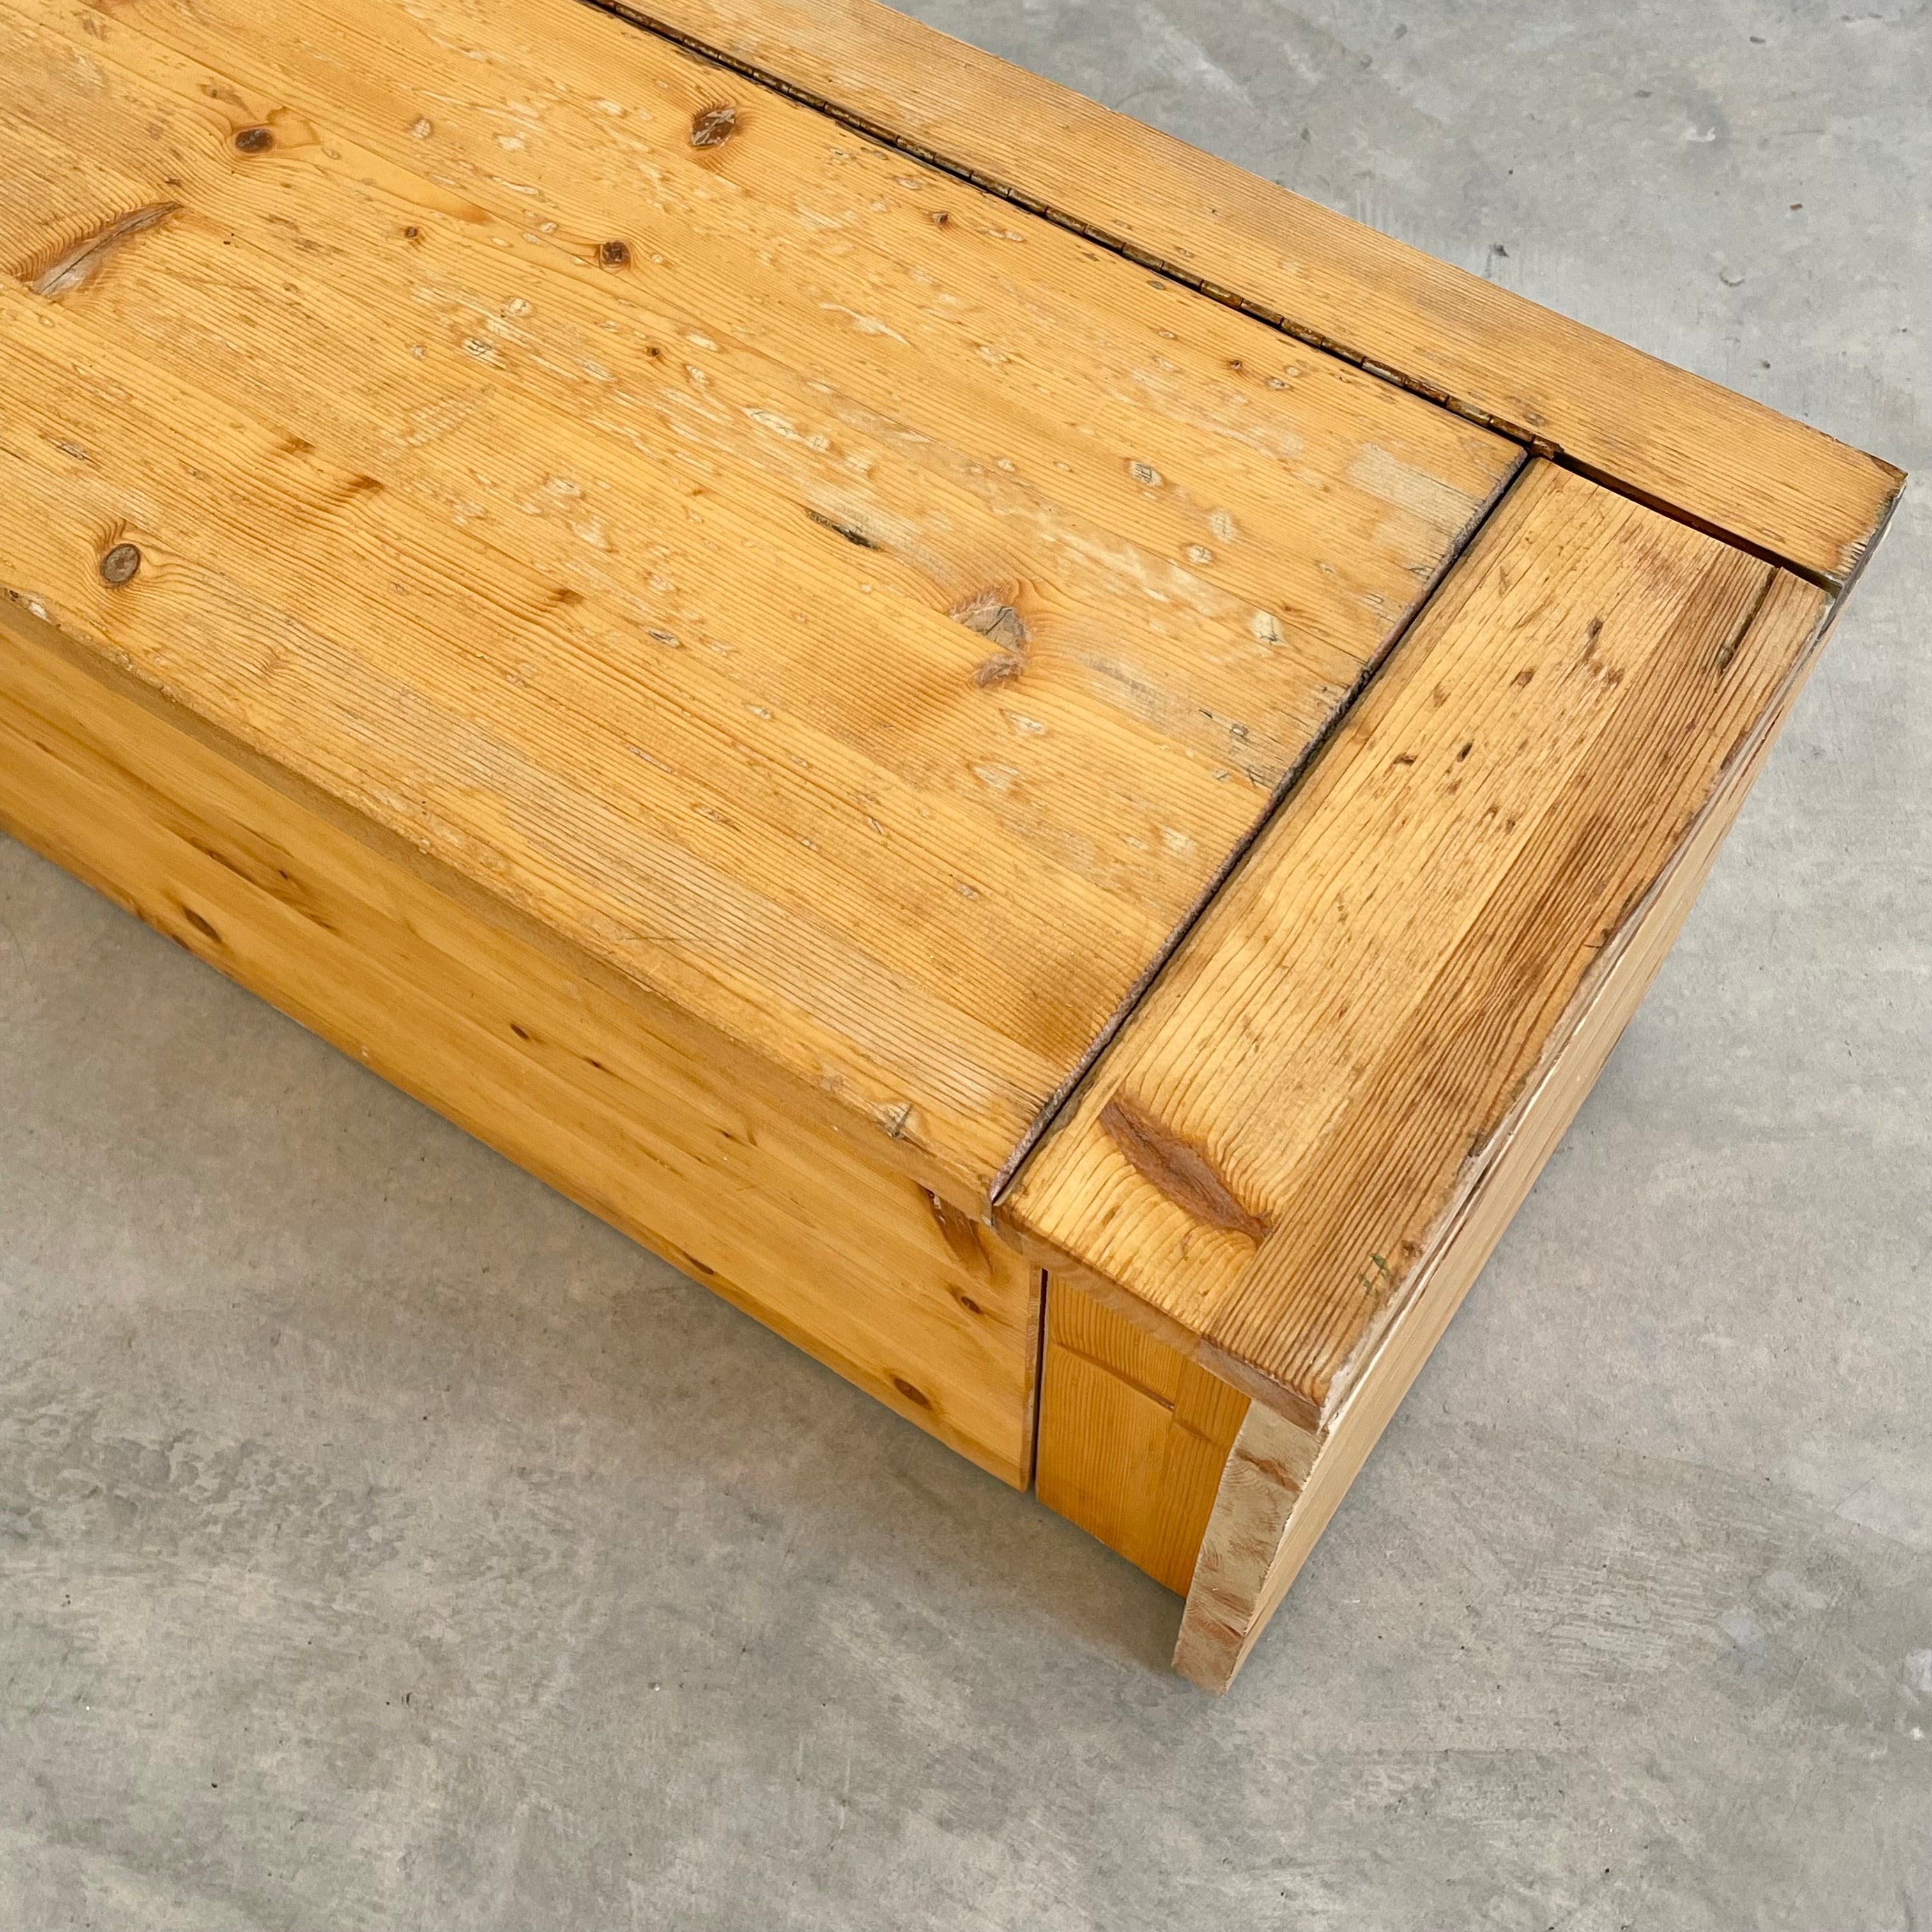 Monumental Charlotte Perriand Pine Storage Bench for Les Arcs, 1960s